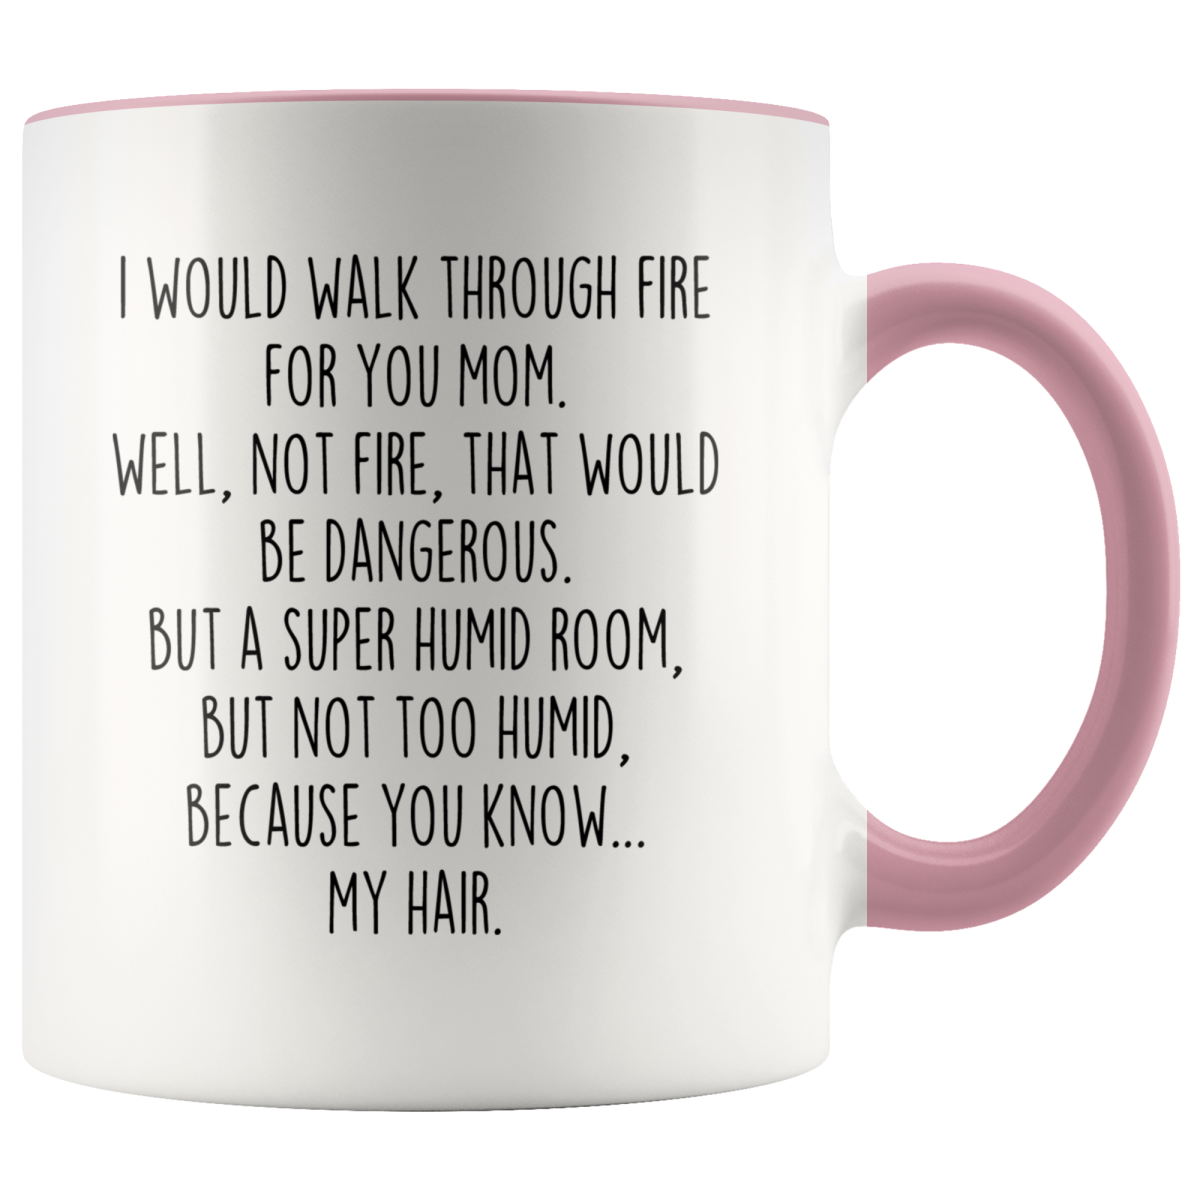 https://backyardpeaks.com/cdn/shop/products/funny-mom-gifts-i-would-walk-through-fire-for-you-coffee-mug-gift-pink-birthday-christmas-mugs-mothers-day-personalized-drinkware-backyardpeaks-923_1200x.png?v=1602401460